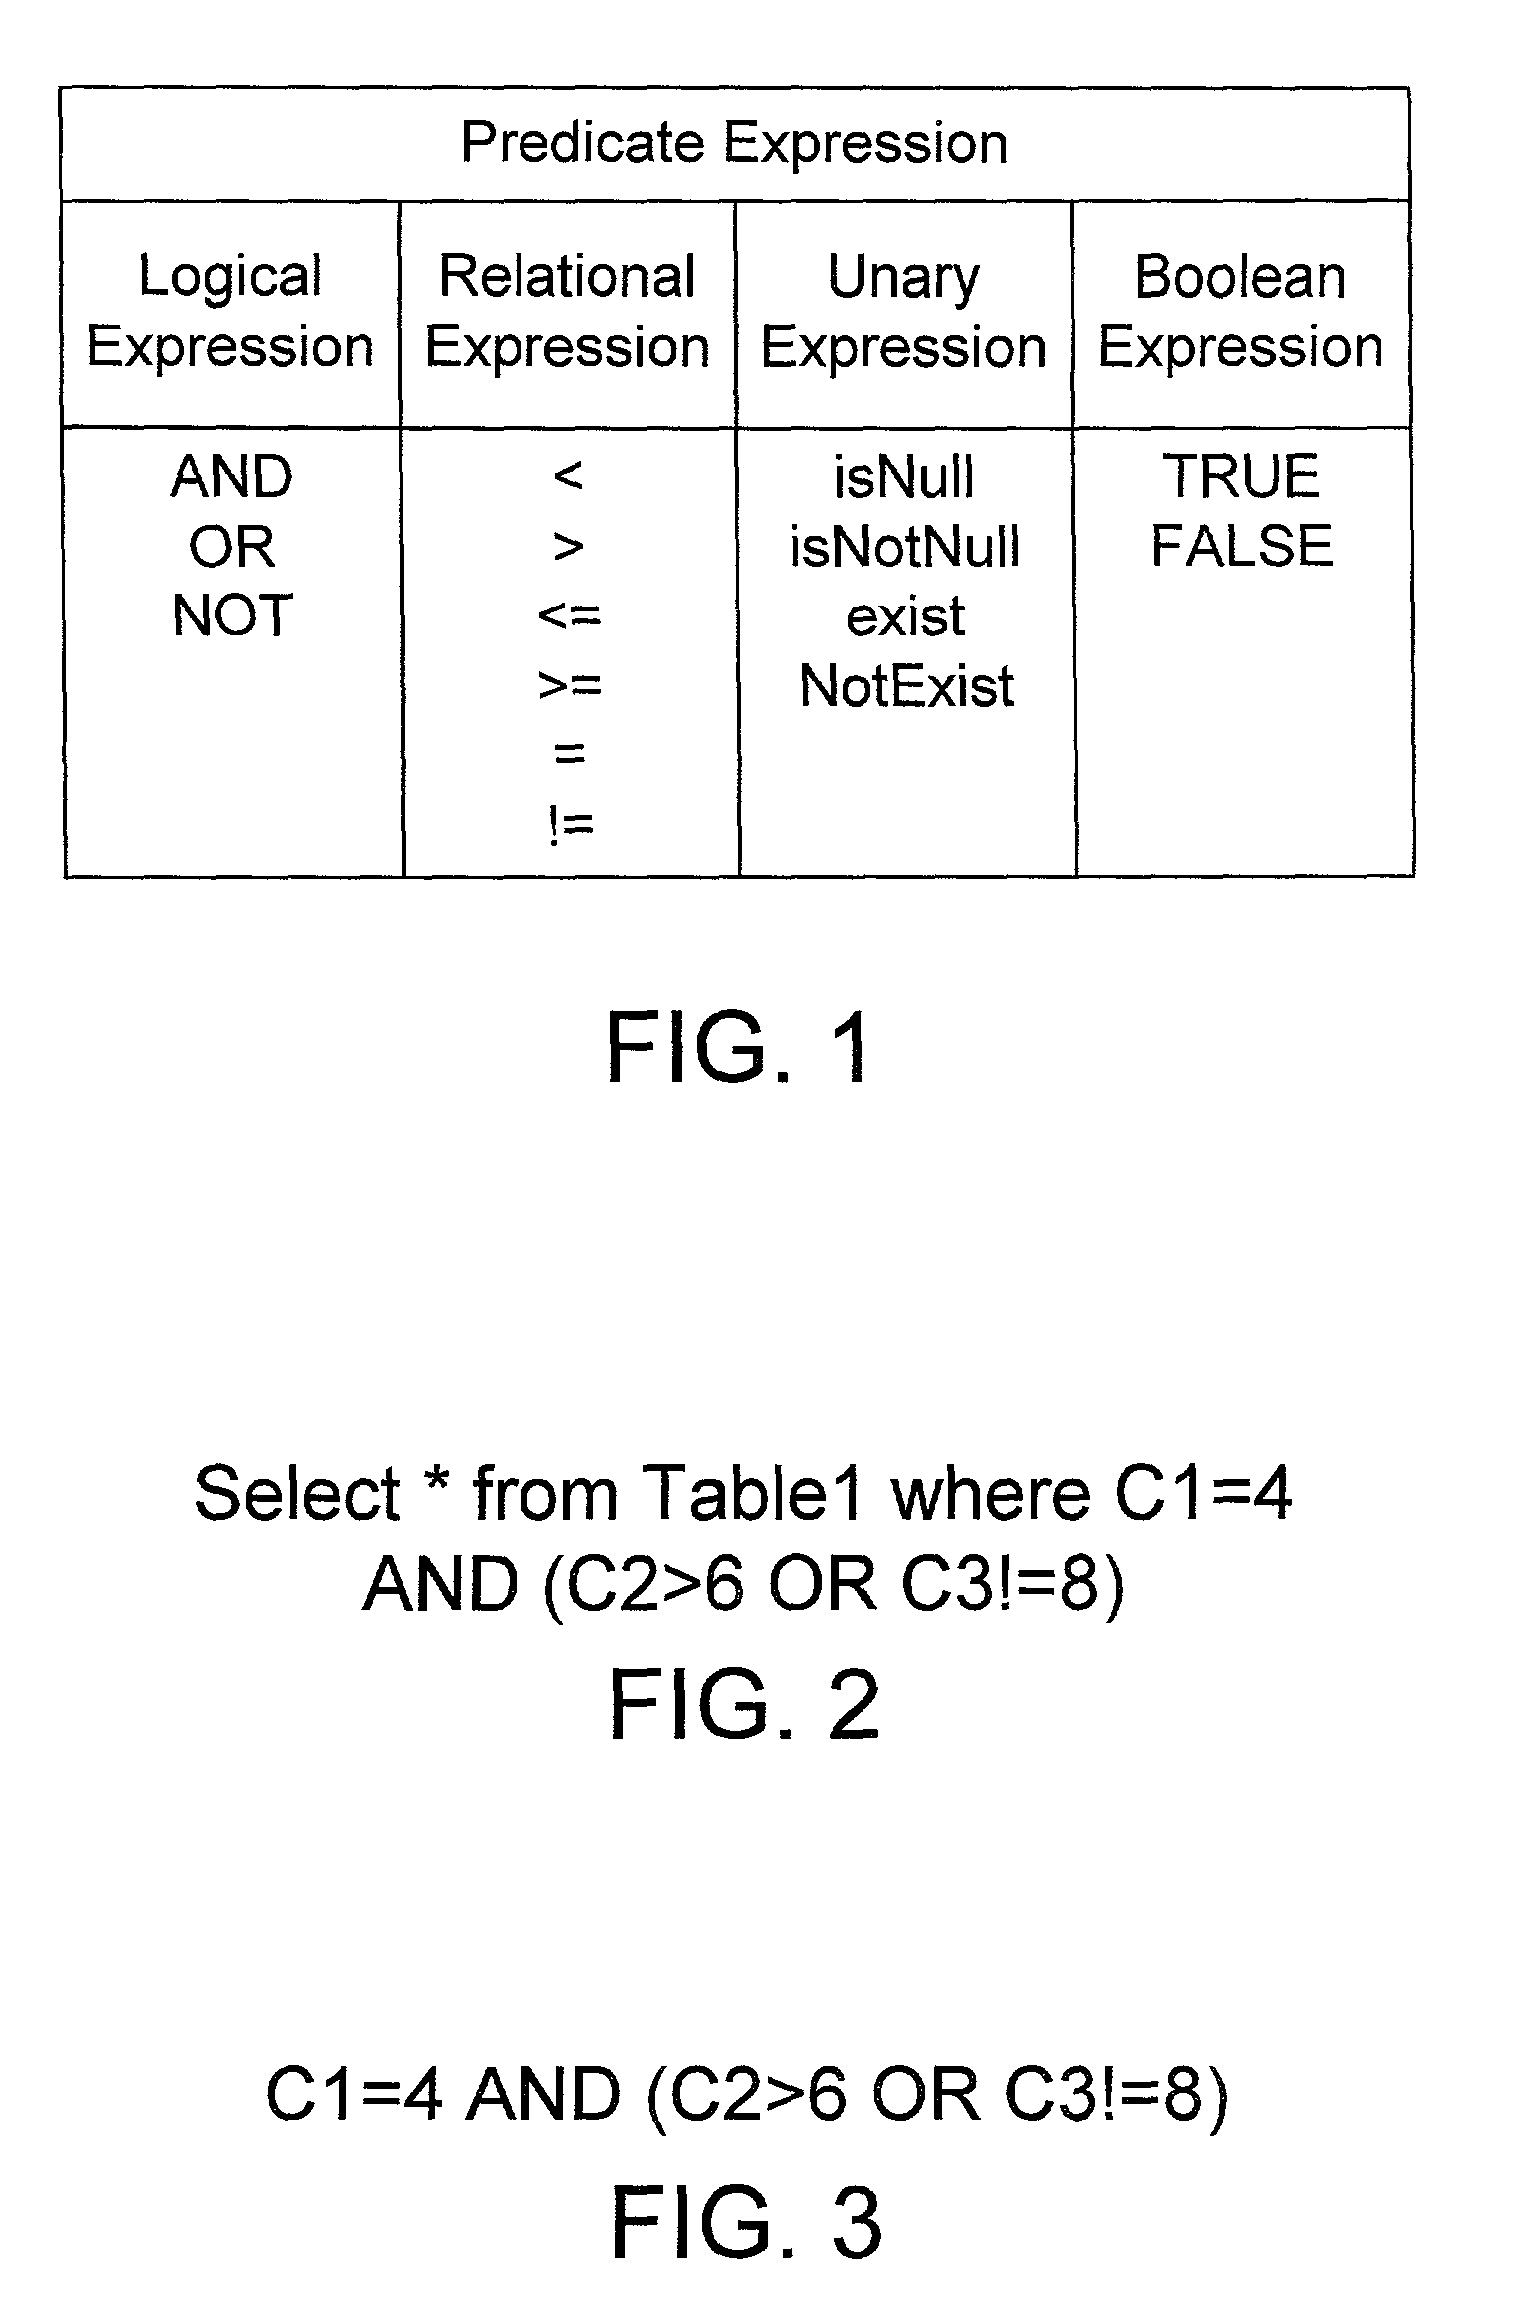 Database query optimization apparatus and method